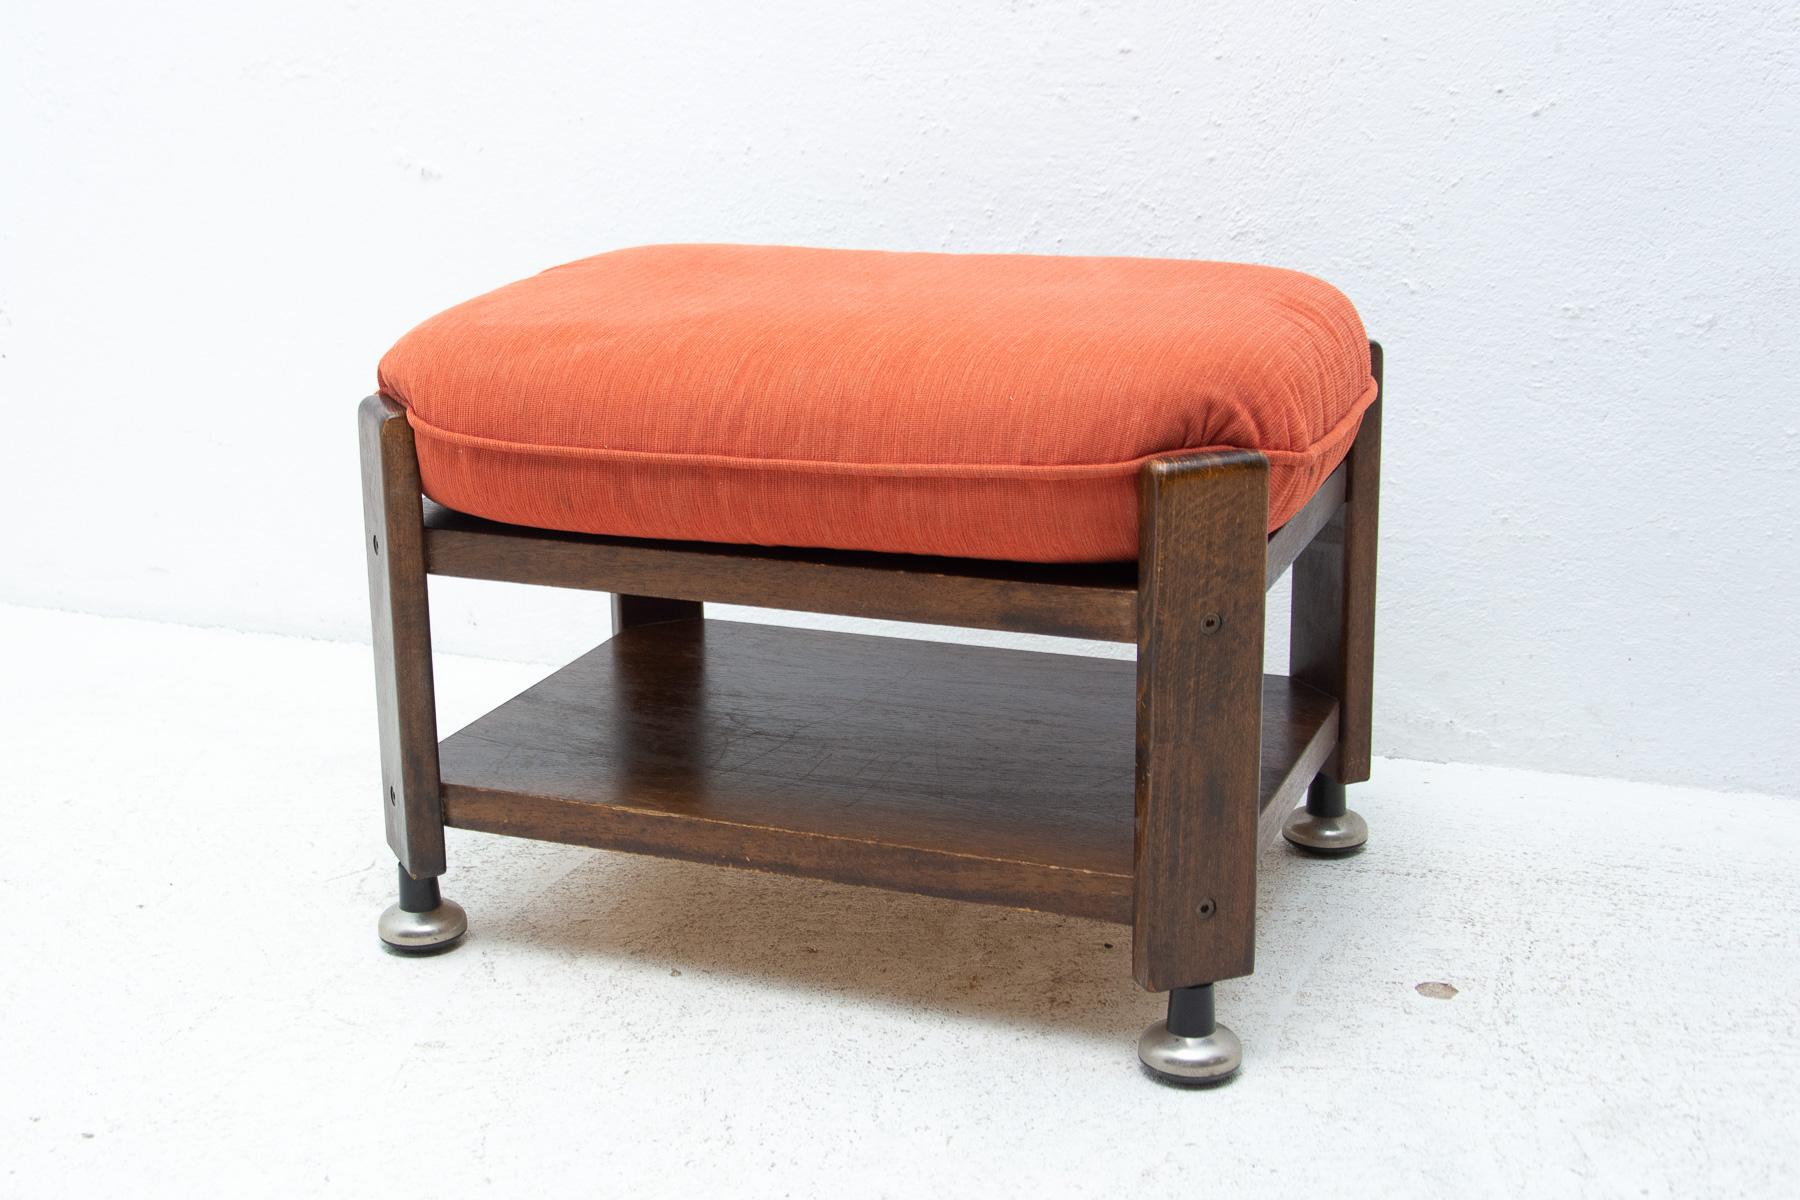 This stool was made in the former Czechoslovakia in the 1980´s. It´s made of wood and fabric. It can be used as a side table.

In very good condition.

Measures: Height: 42 cm

width: 62 cm

depth: 45 cm

Seat height: 42 cm.